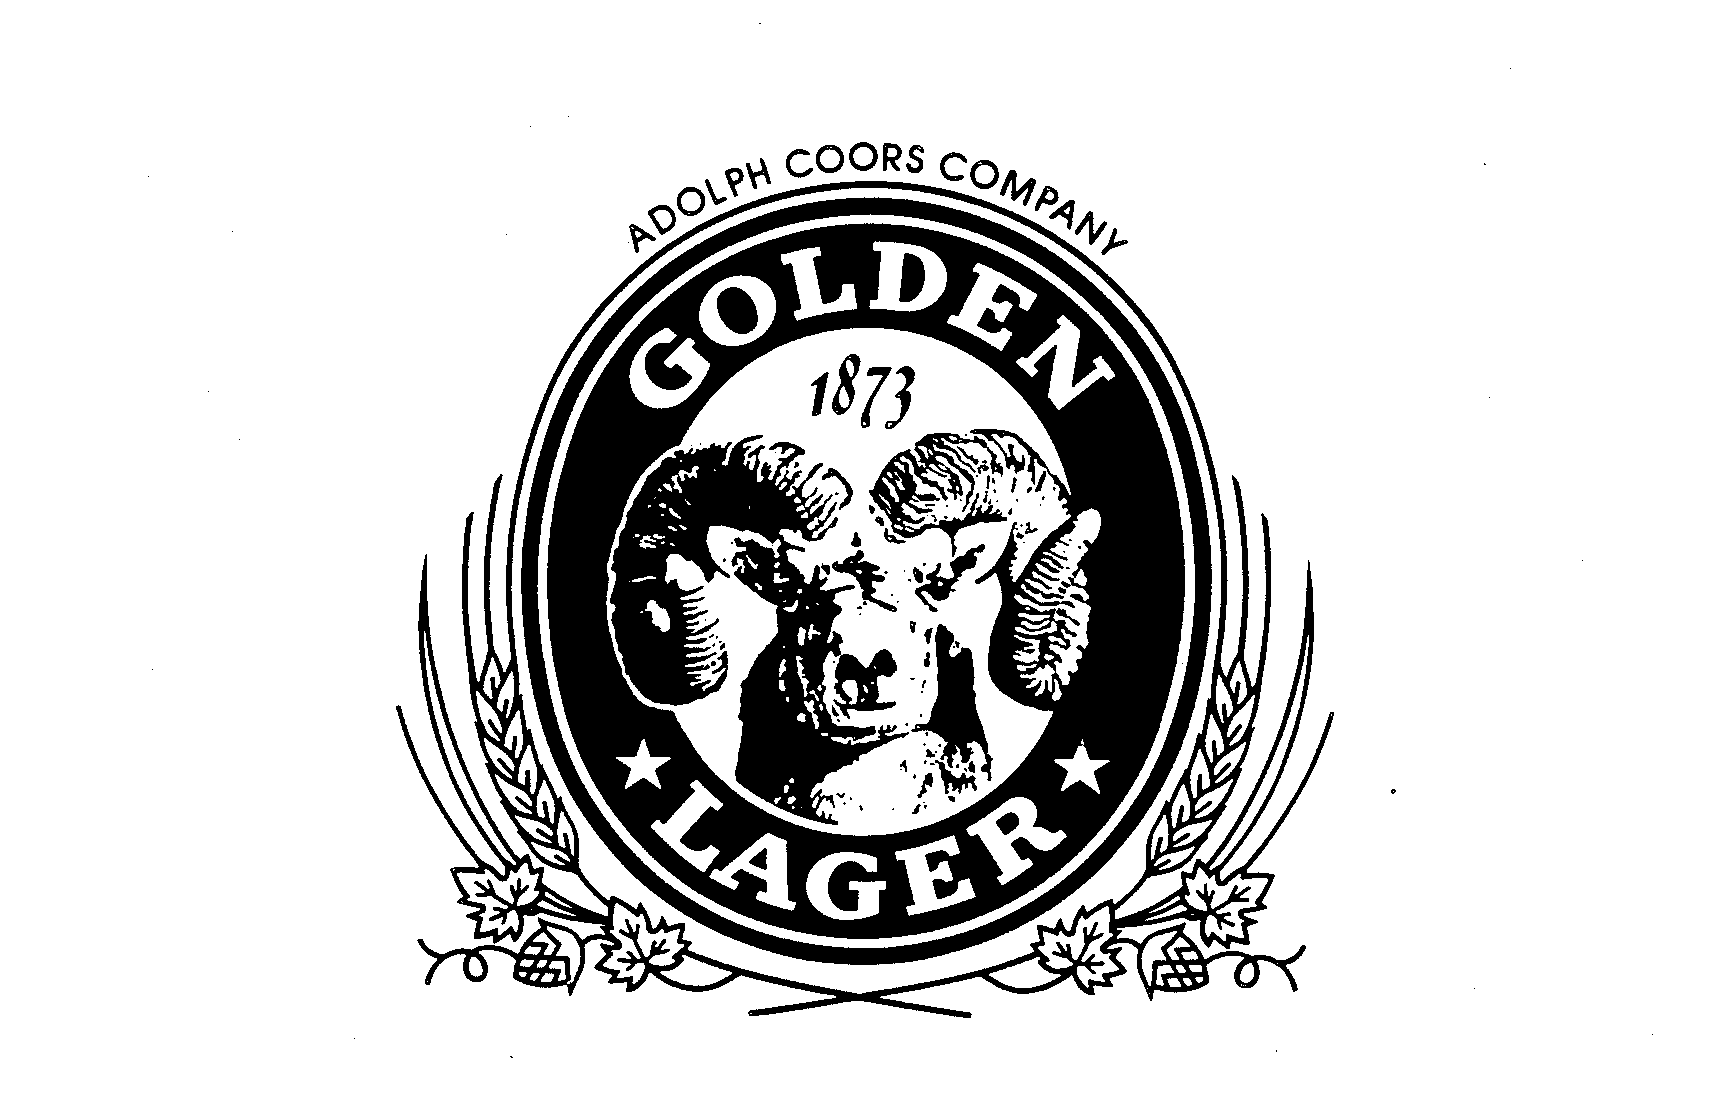 Trademark Logo ADOLPH COORS COMPANY GOLDEN LAGER 1873